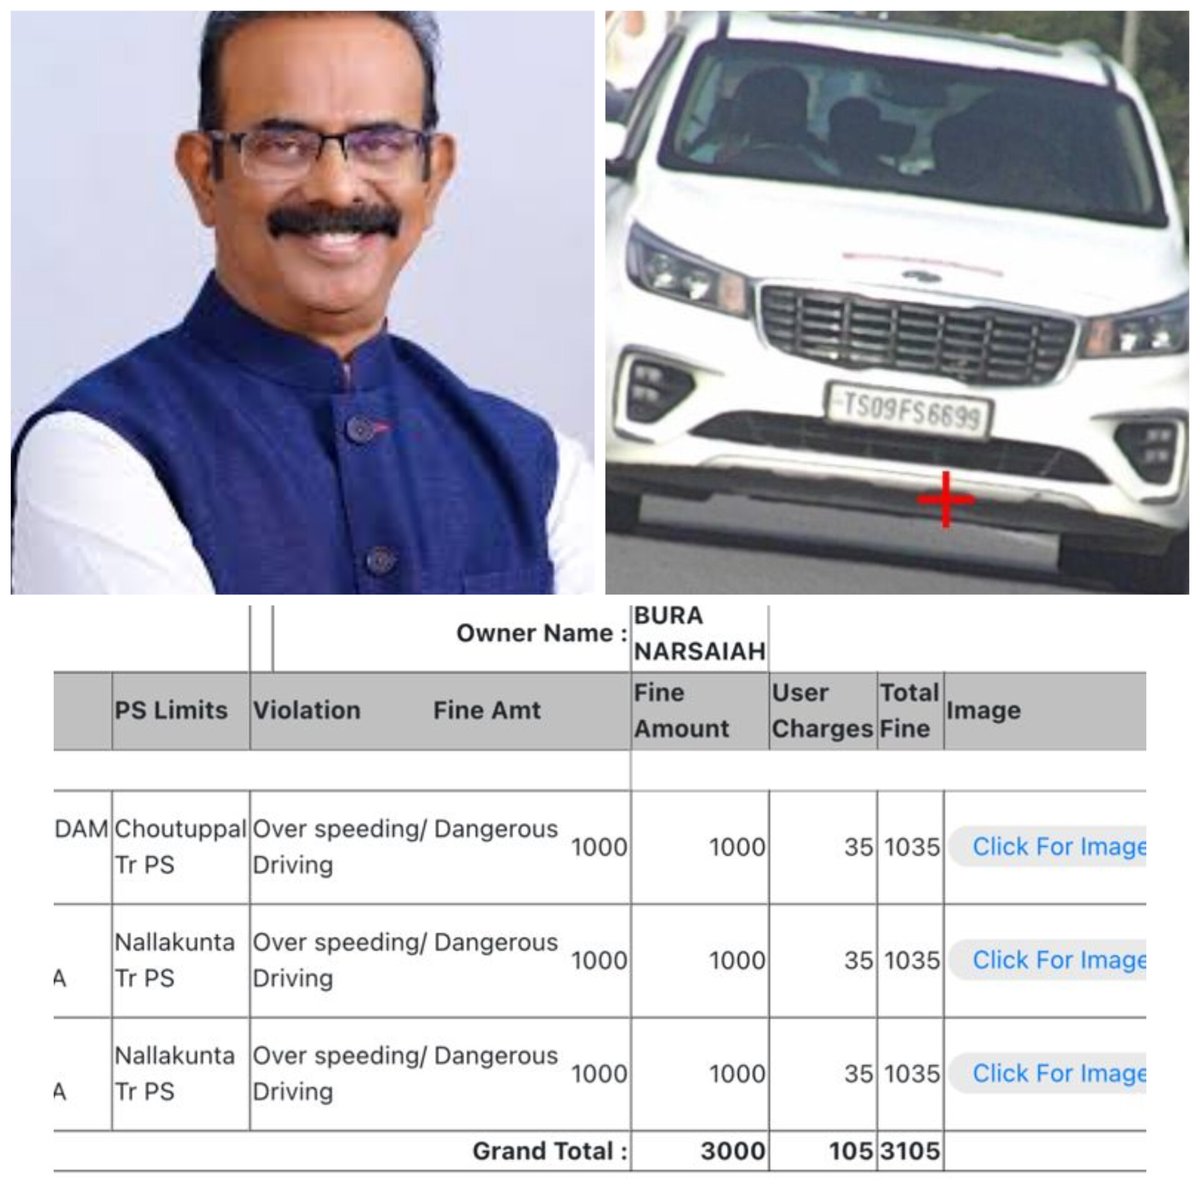 Rash Driving to Signal Jumping: Lok Sabha Contestants pile up traffic challans

Several Loksabha poll candidates from Major Parties in Telangana have pending challans against their vehicles for various traffic rule violations.

MP candidates are required to settle all dues before